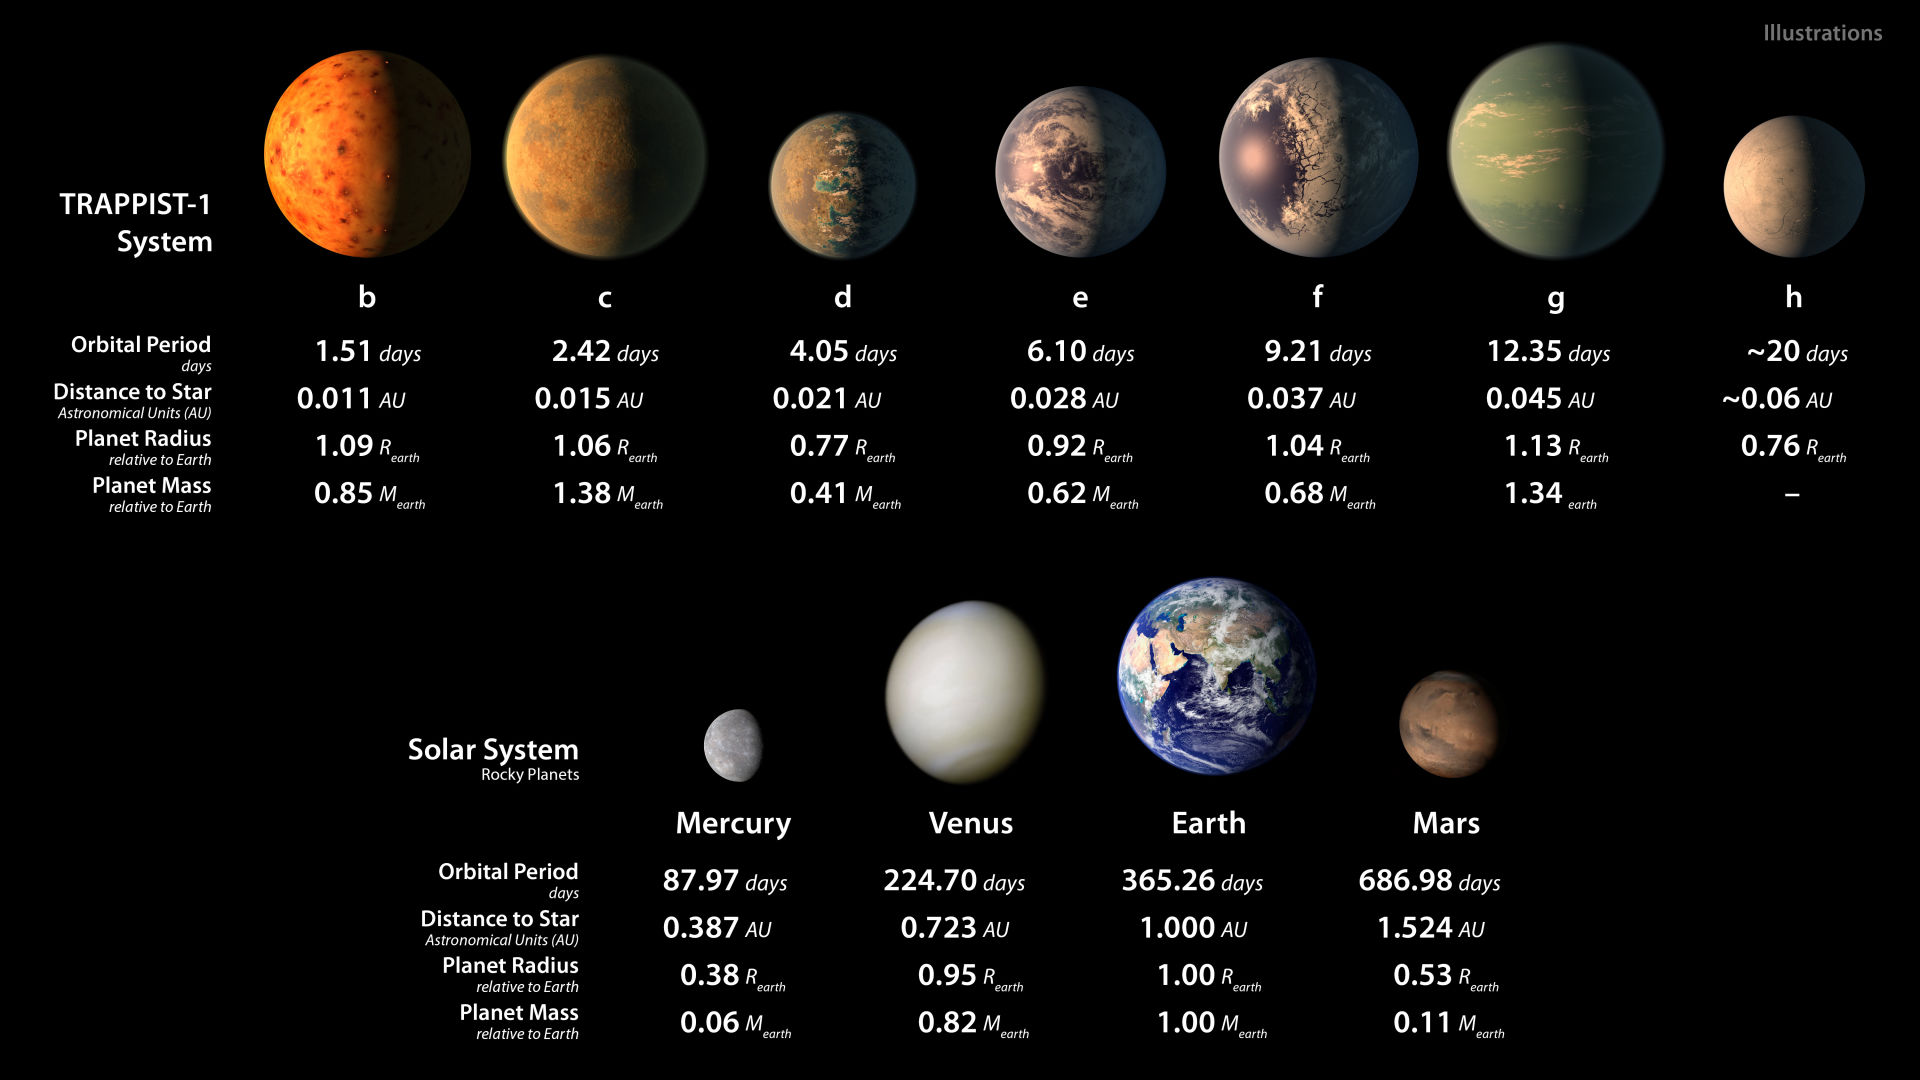 OUR SPACE Trappist-1 and its seven earths Columns unionrecorder pic